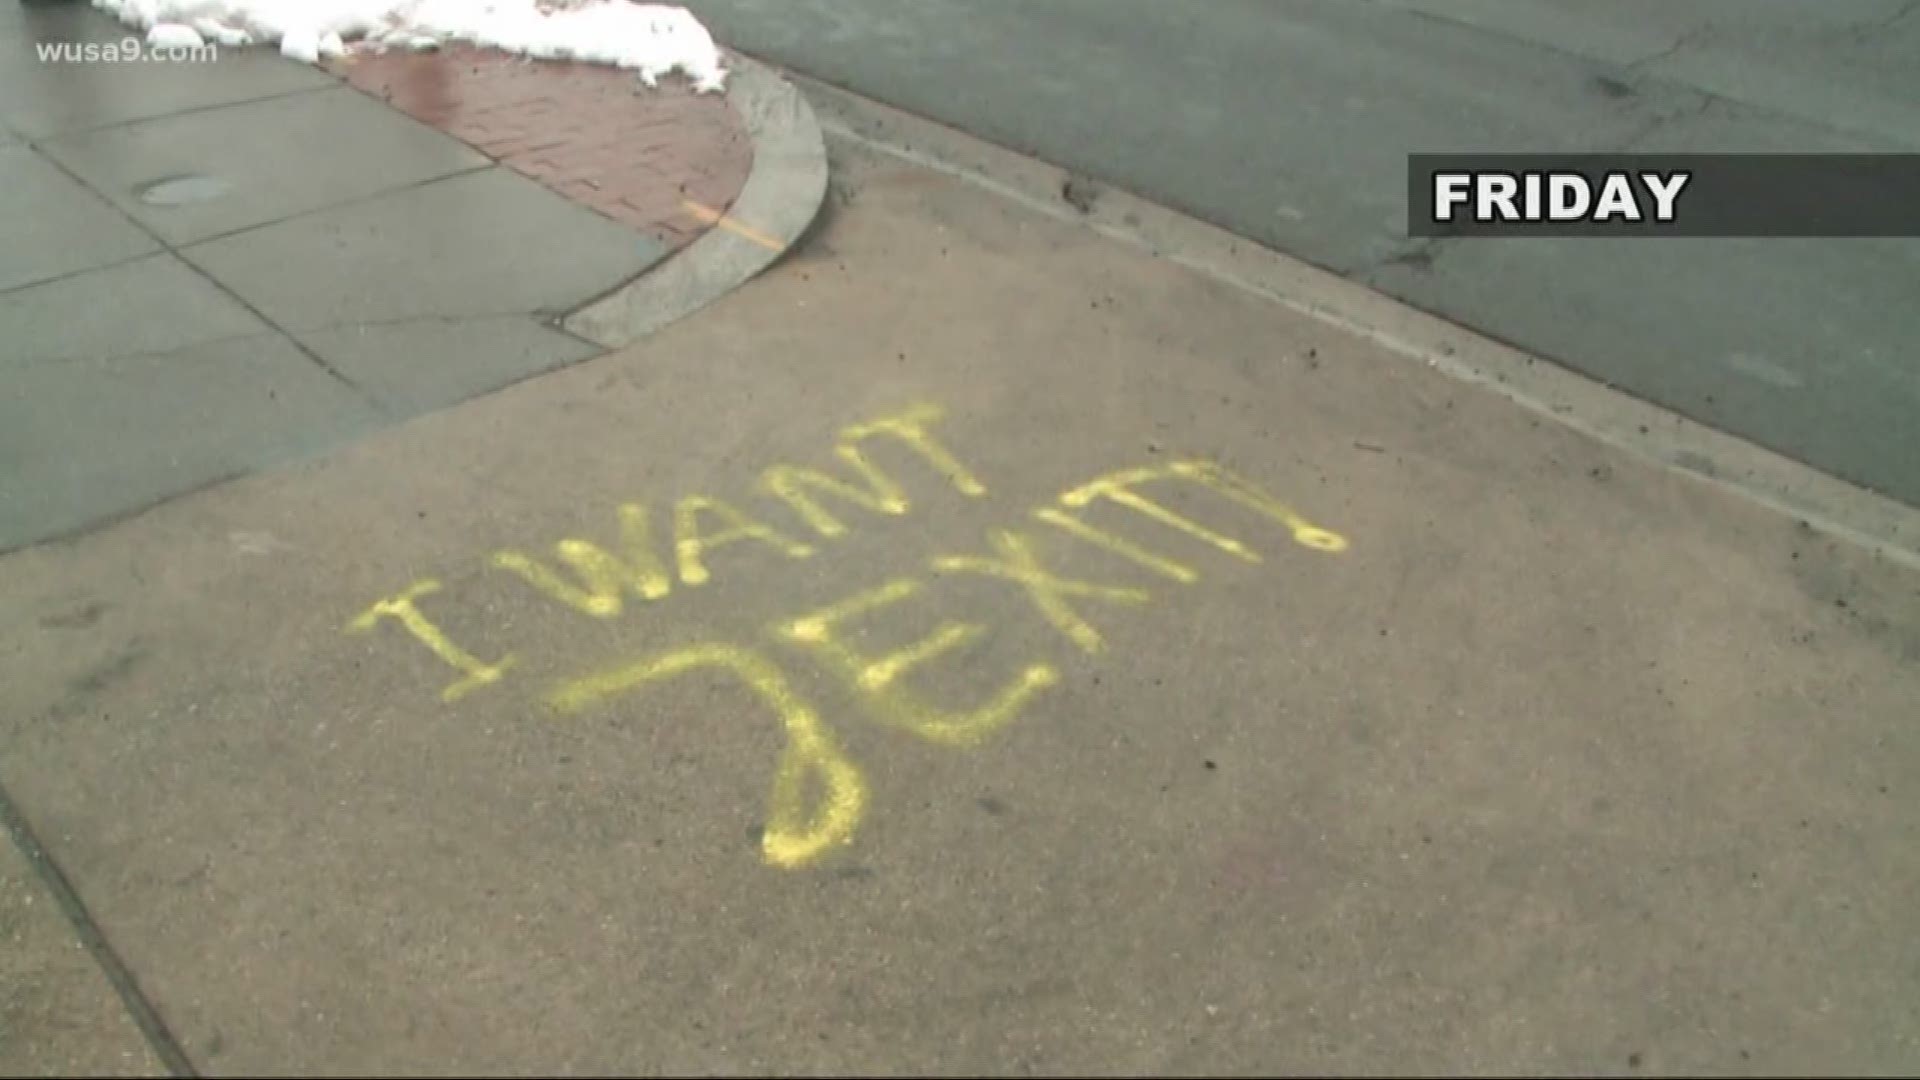 DC Police are working closely with the Anti-Defamation League to investigate what appears to be multiple anti-Semitic graffiti messages spray-painted in NE DC.